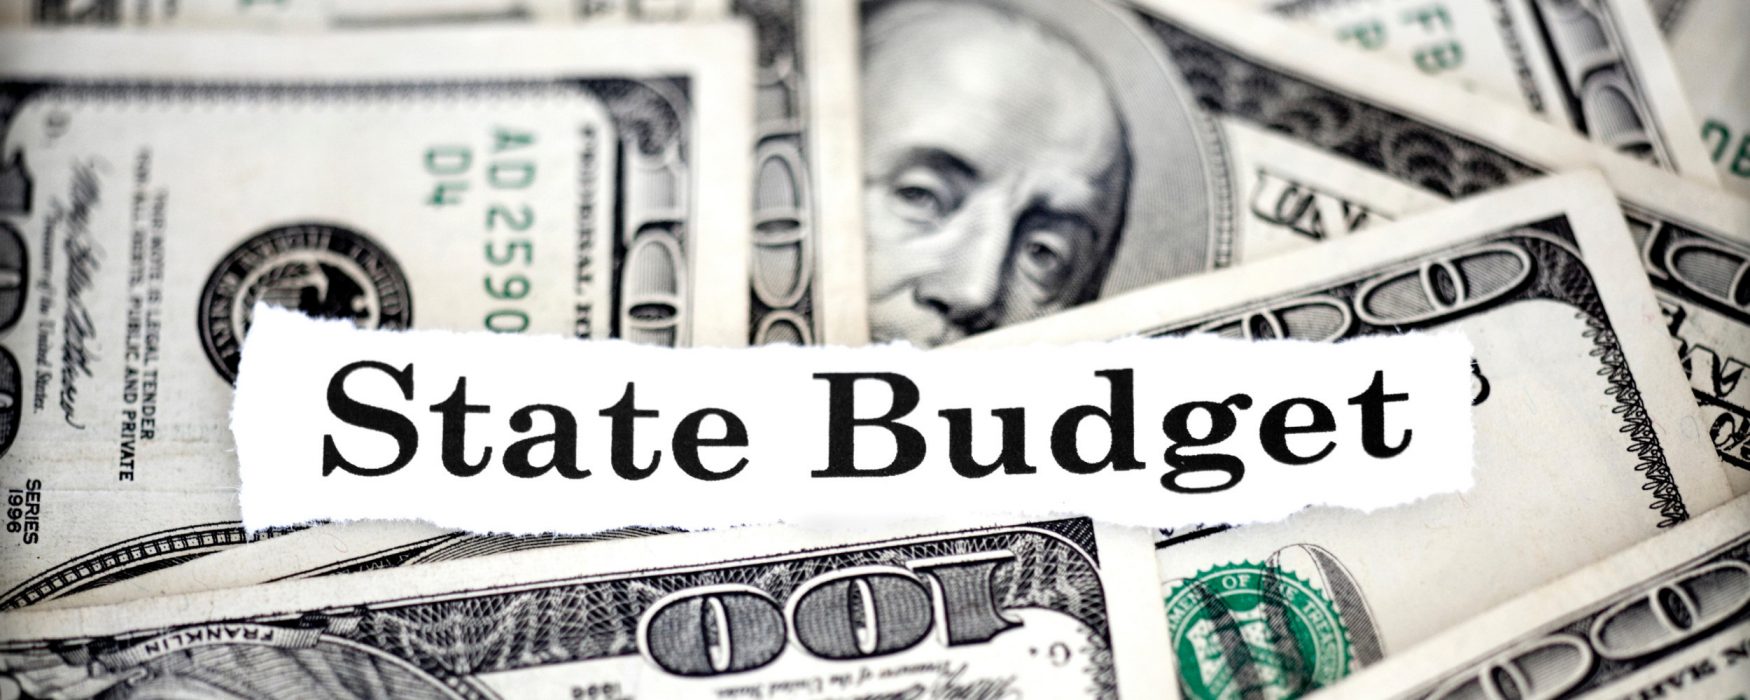 Image showing a background of money and the words State Budget